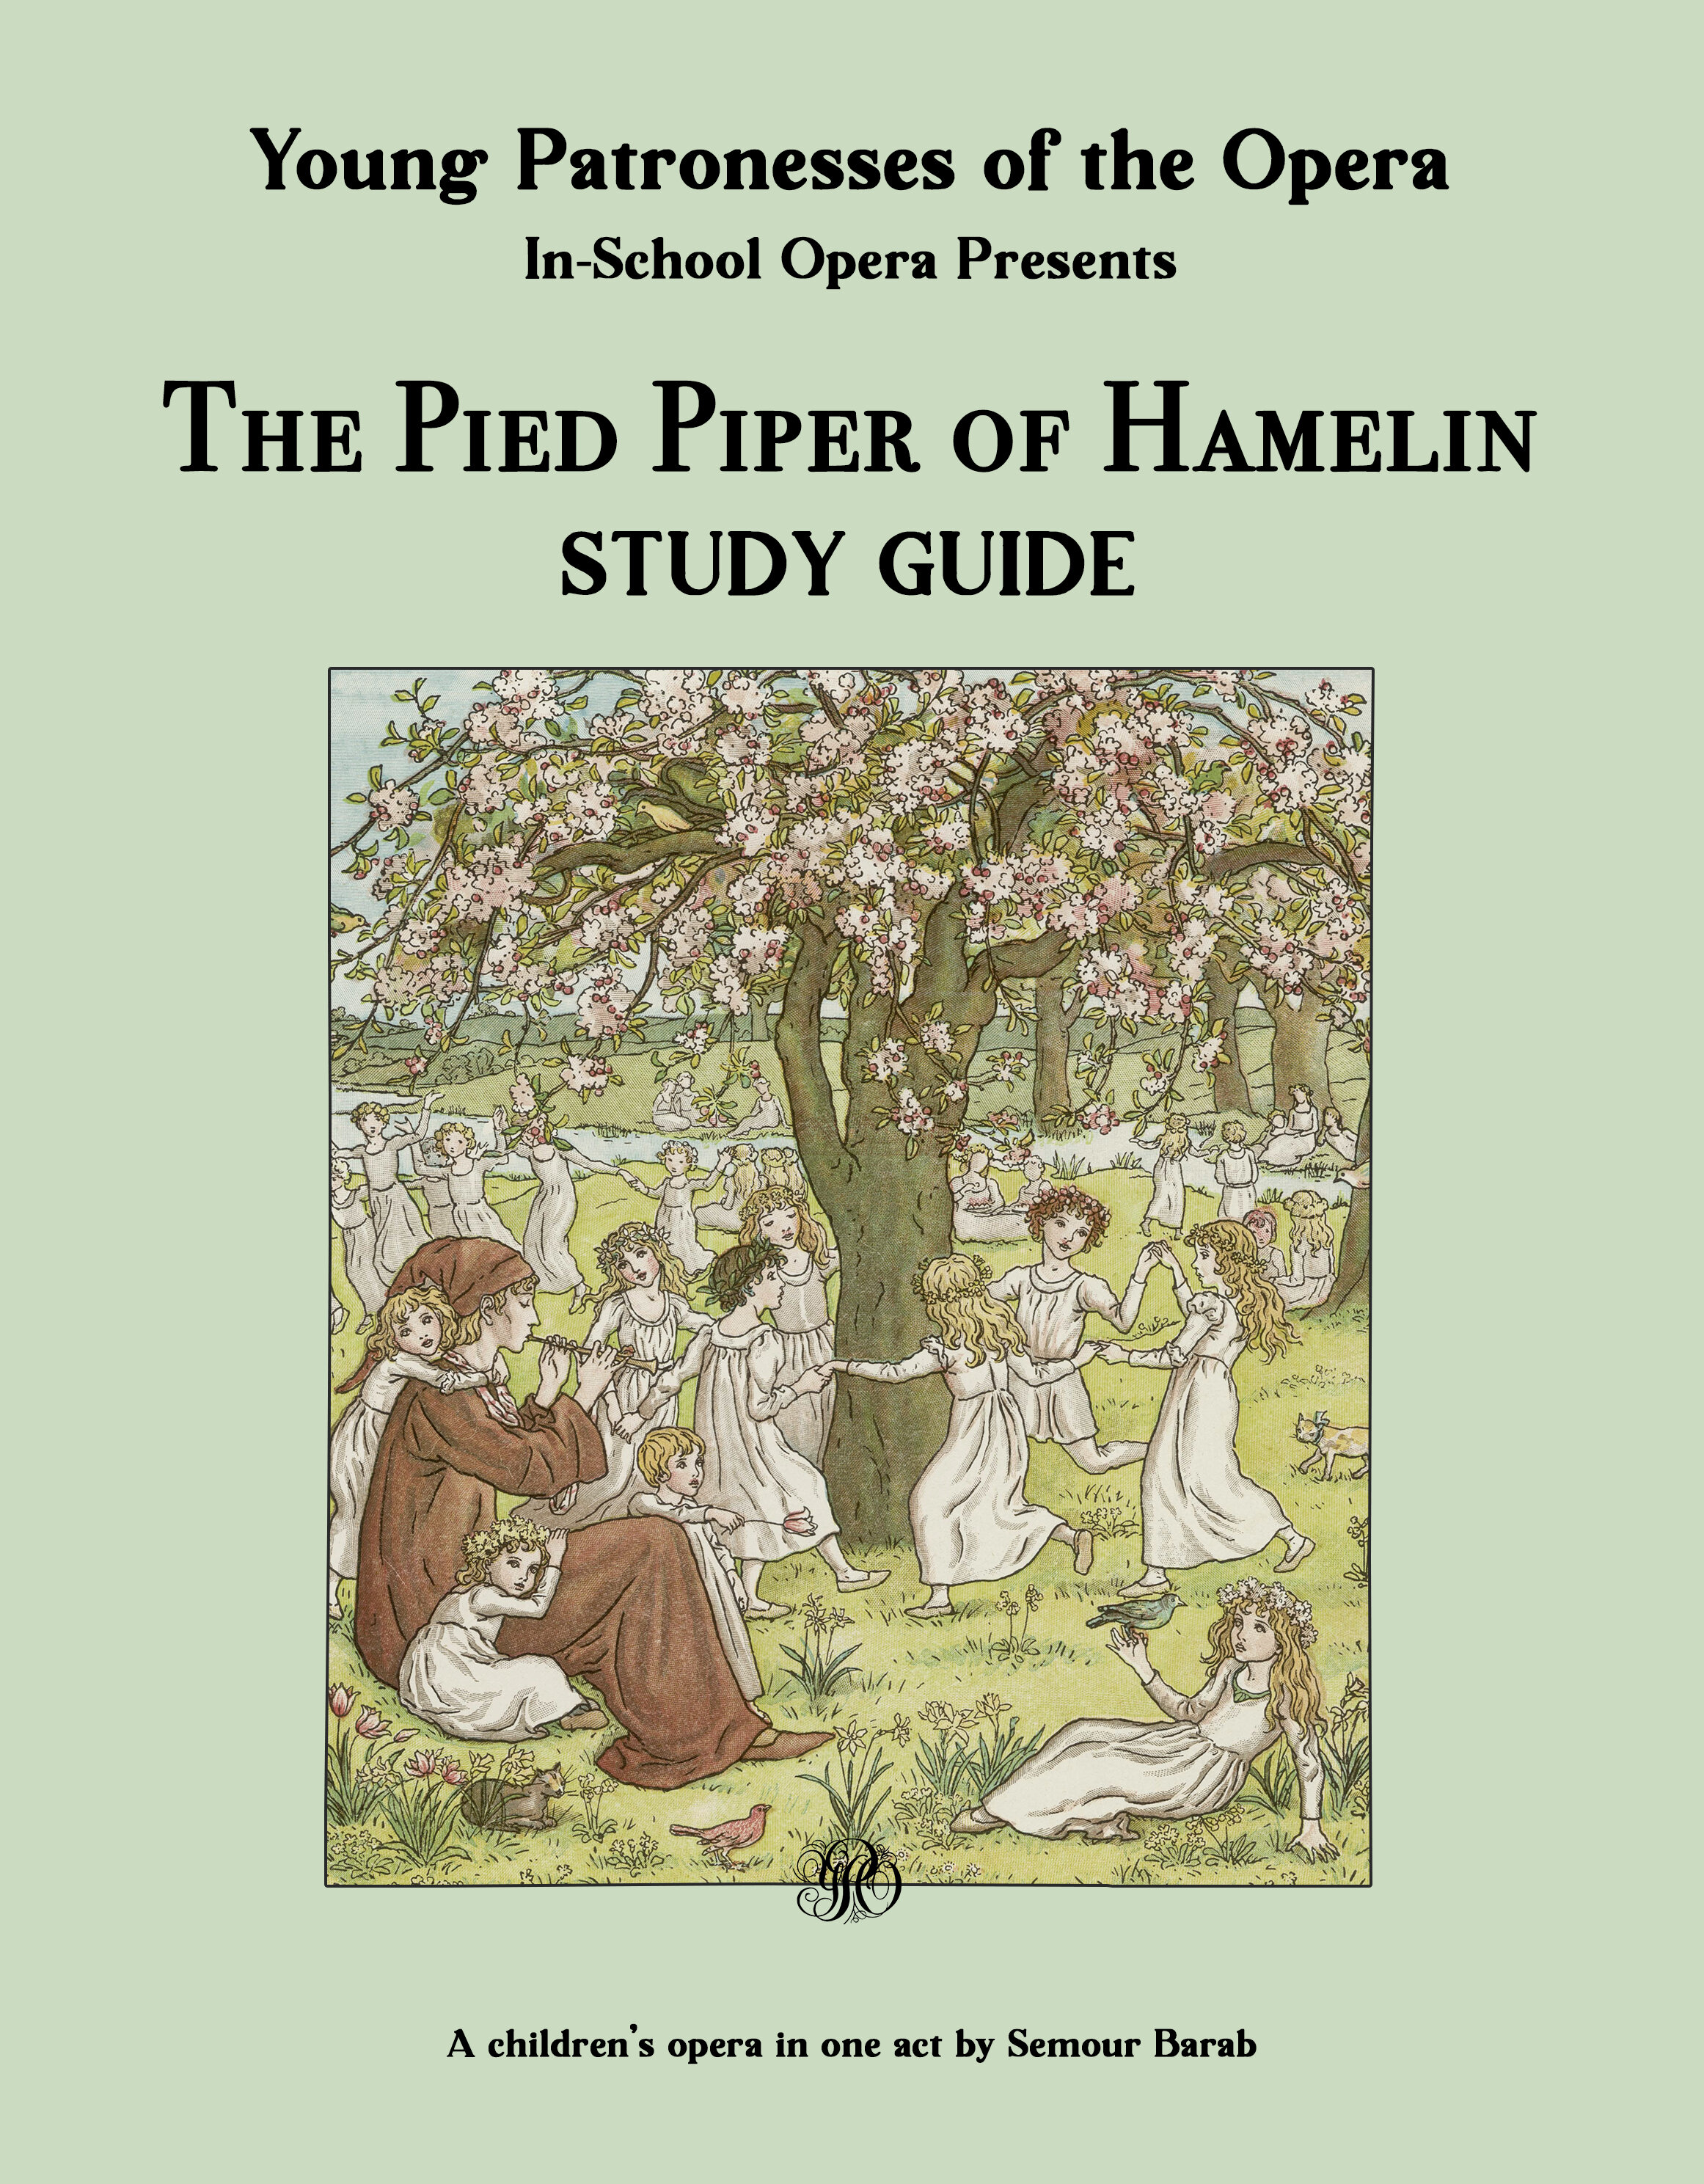 Pied Piper Study Guide front.jpg